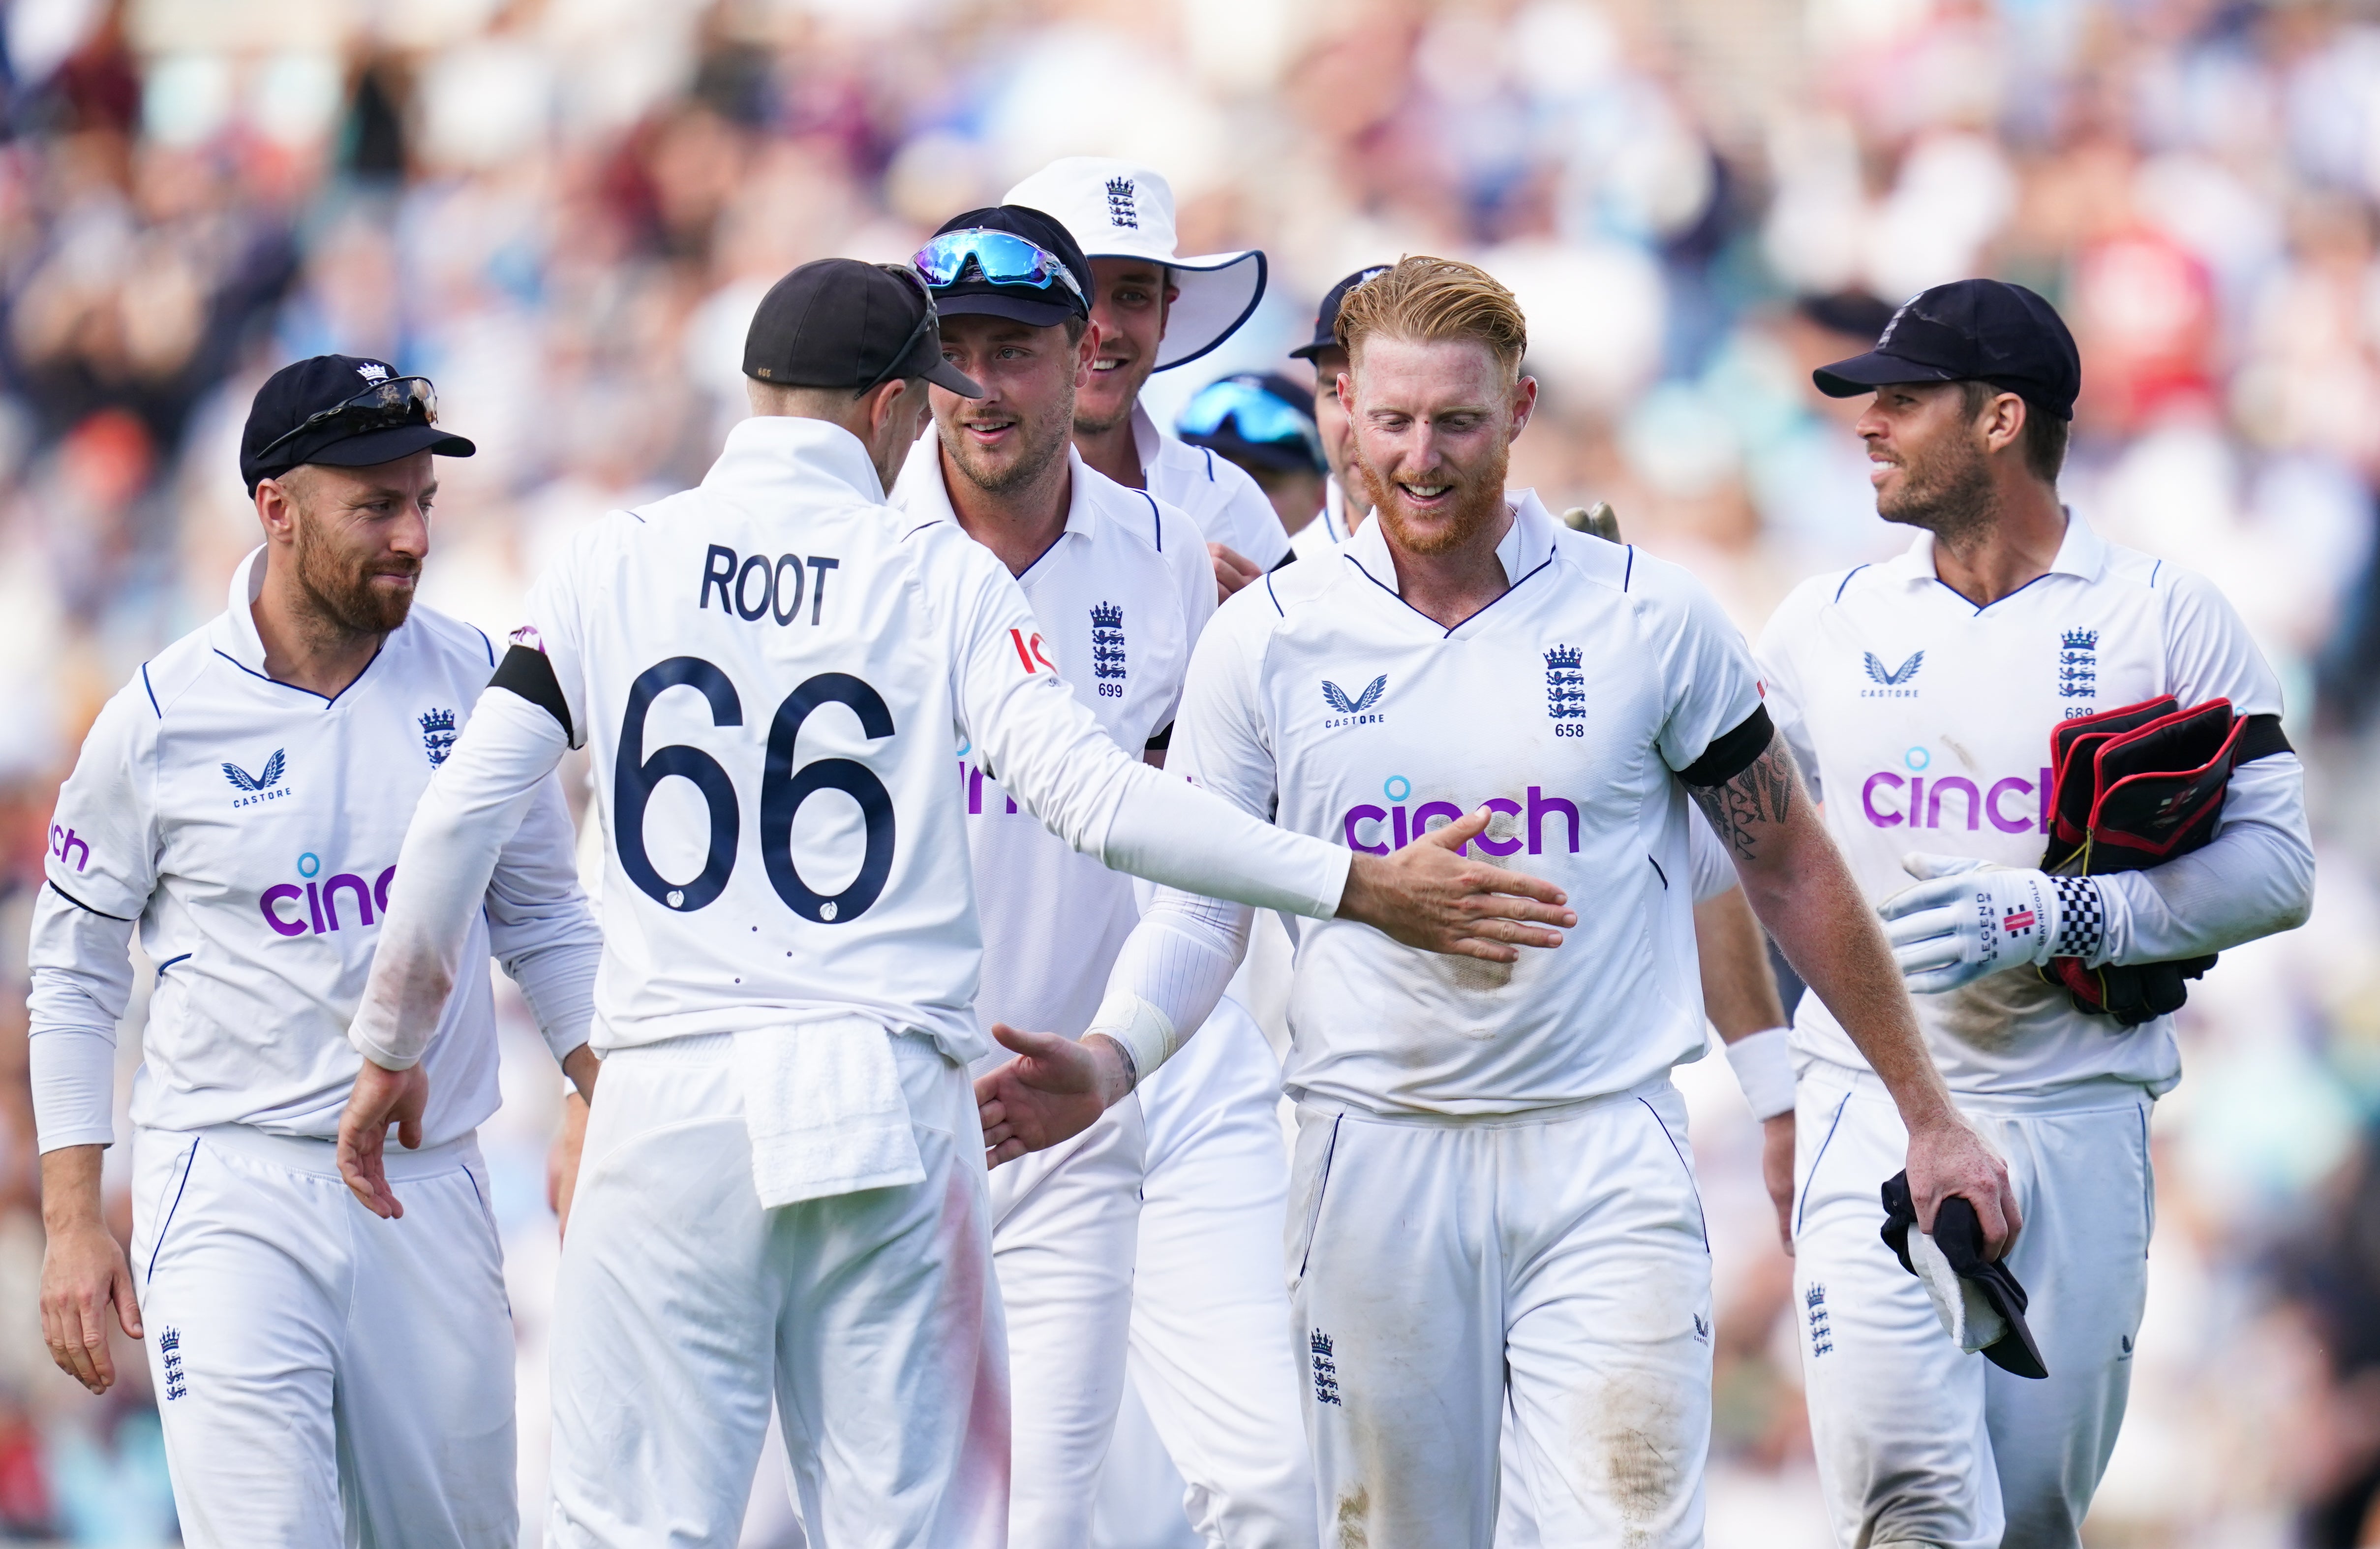 England captain Ben Stokes took three wickets to help put his team into a commanding position against South Africa (John Walton/PA)